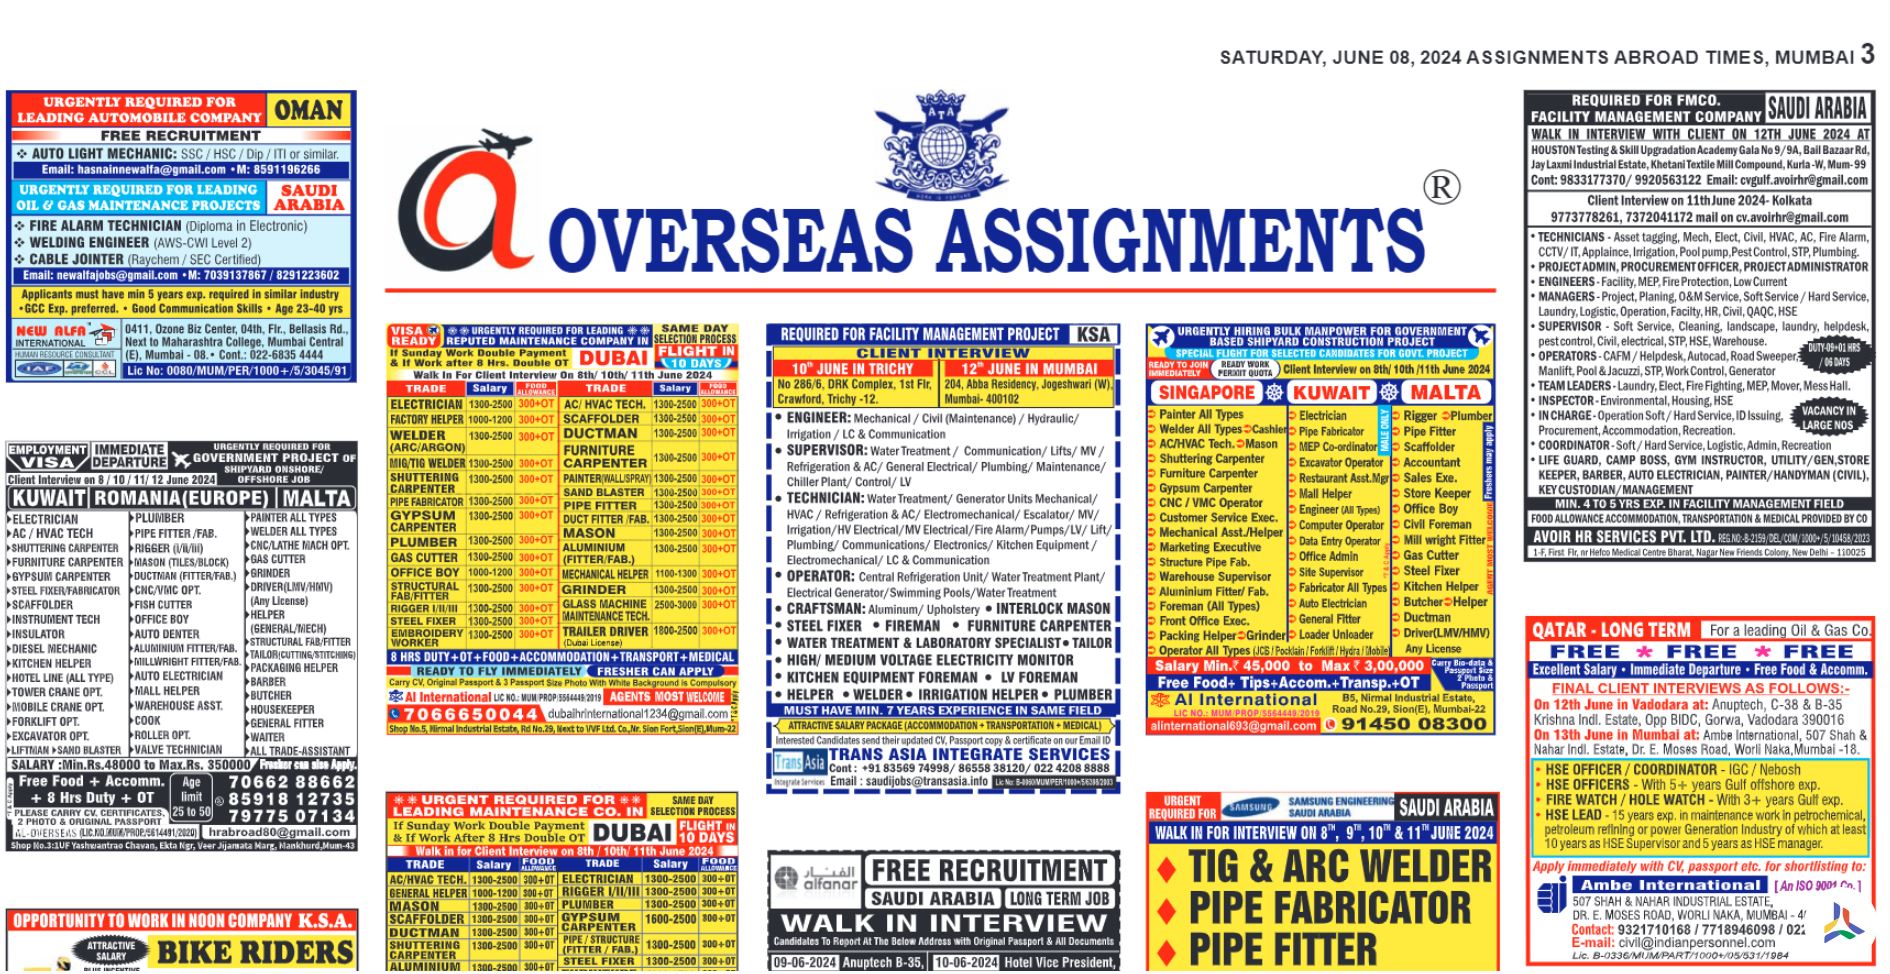 assignment abroad times contact details